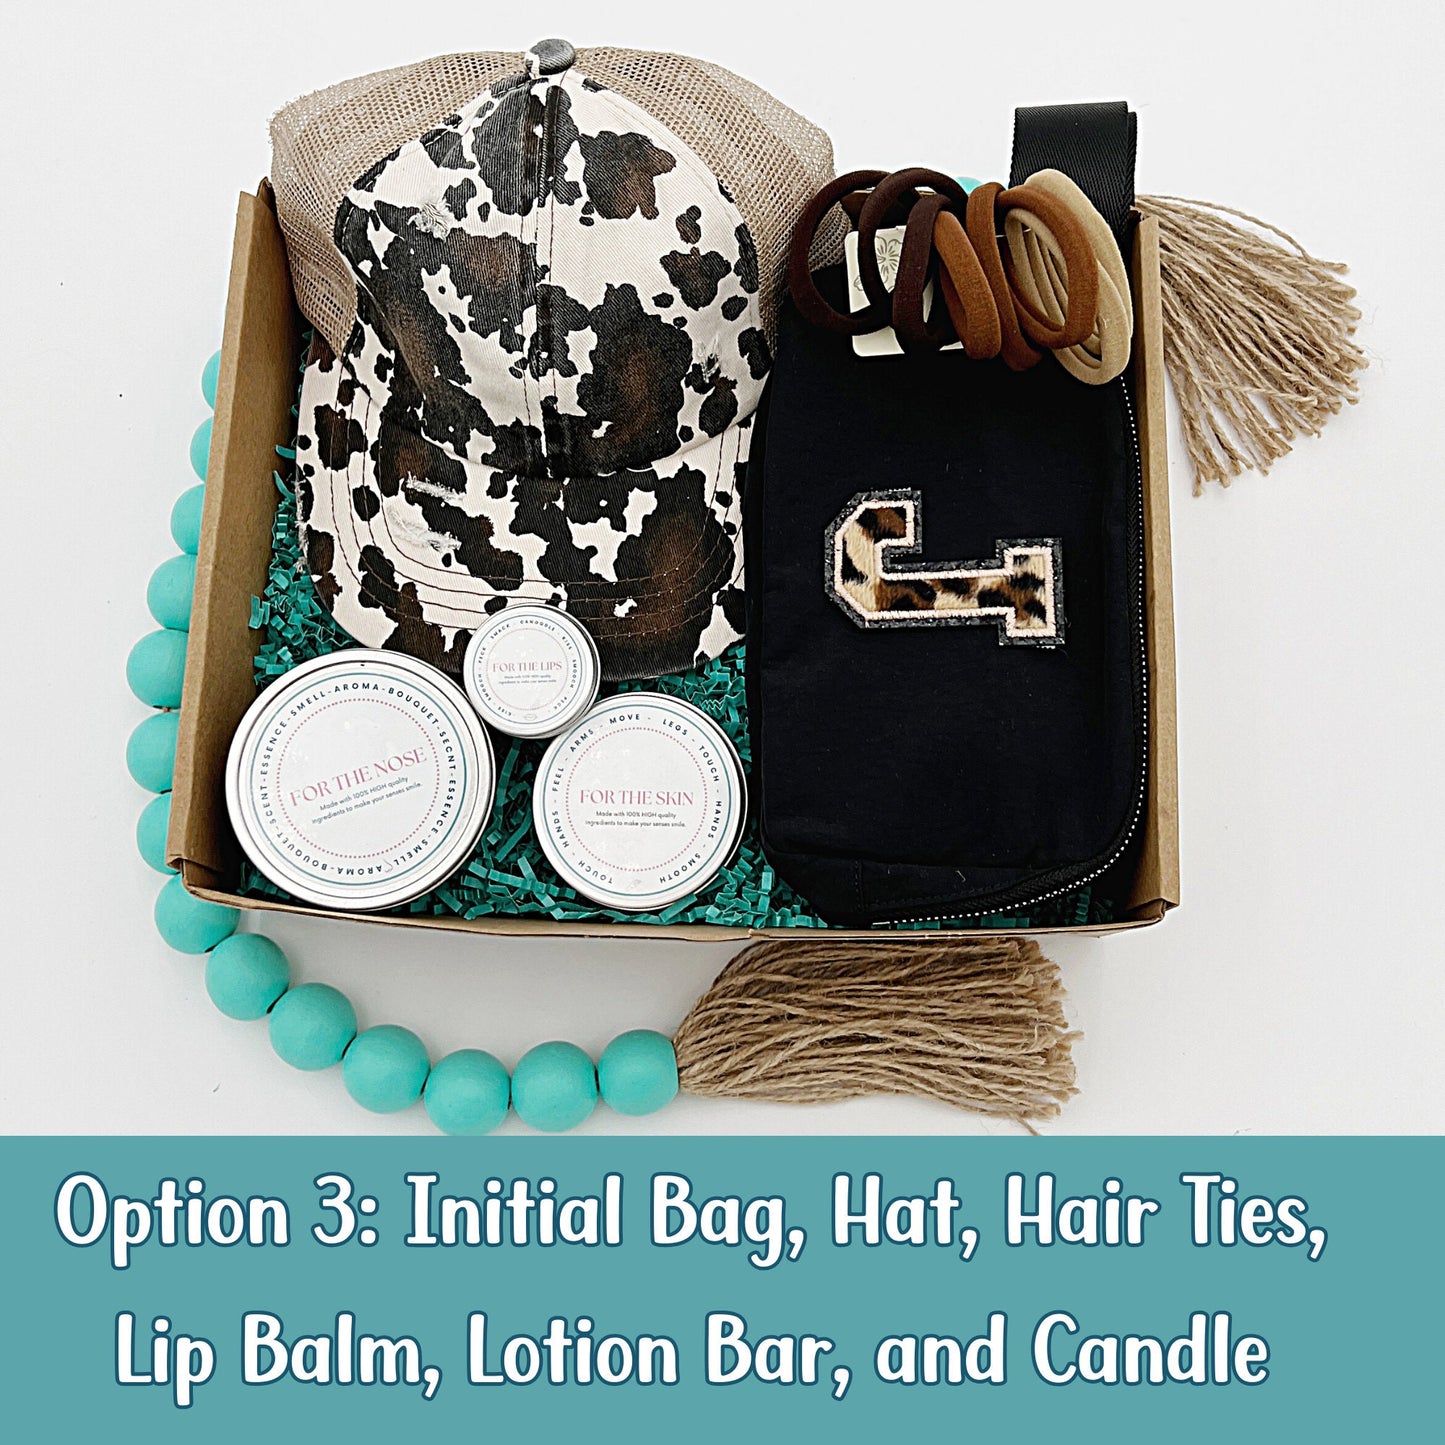 Best Friend gift box with custom name fanny pack, lip balm, candle, and hair ties.